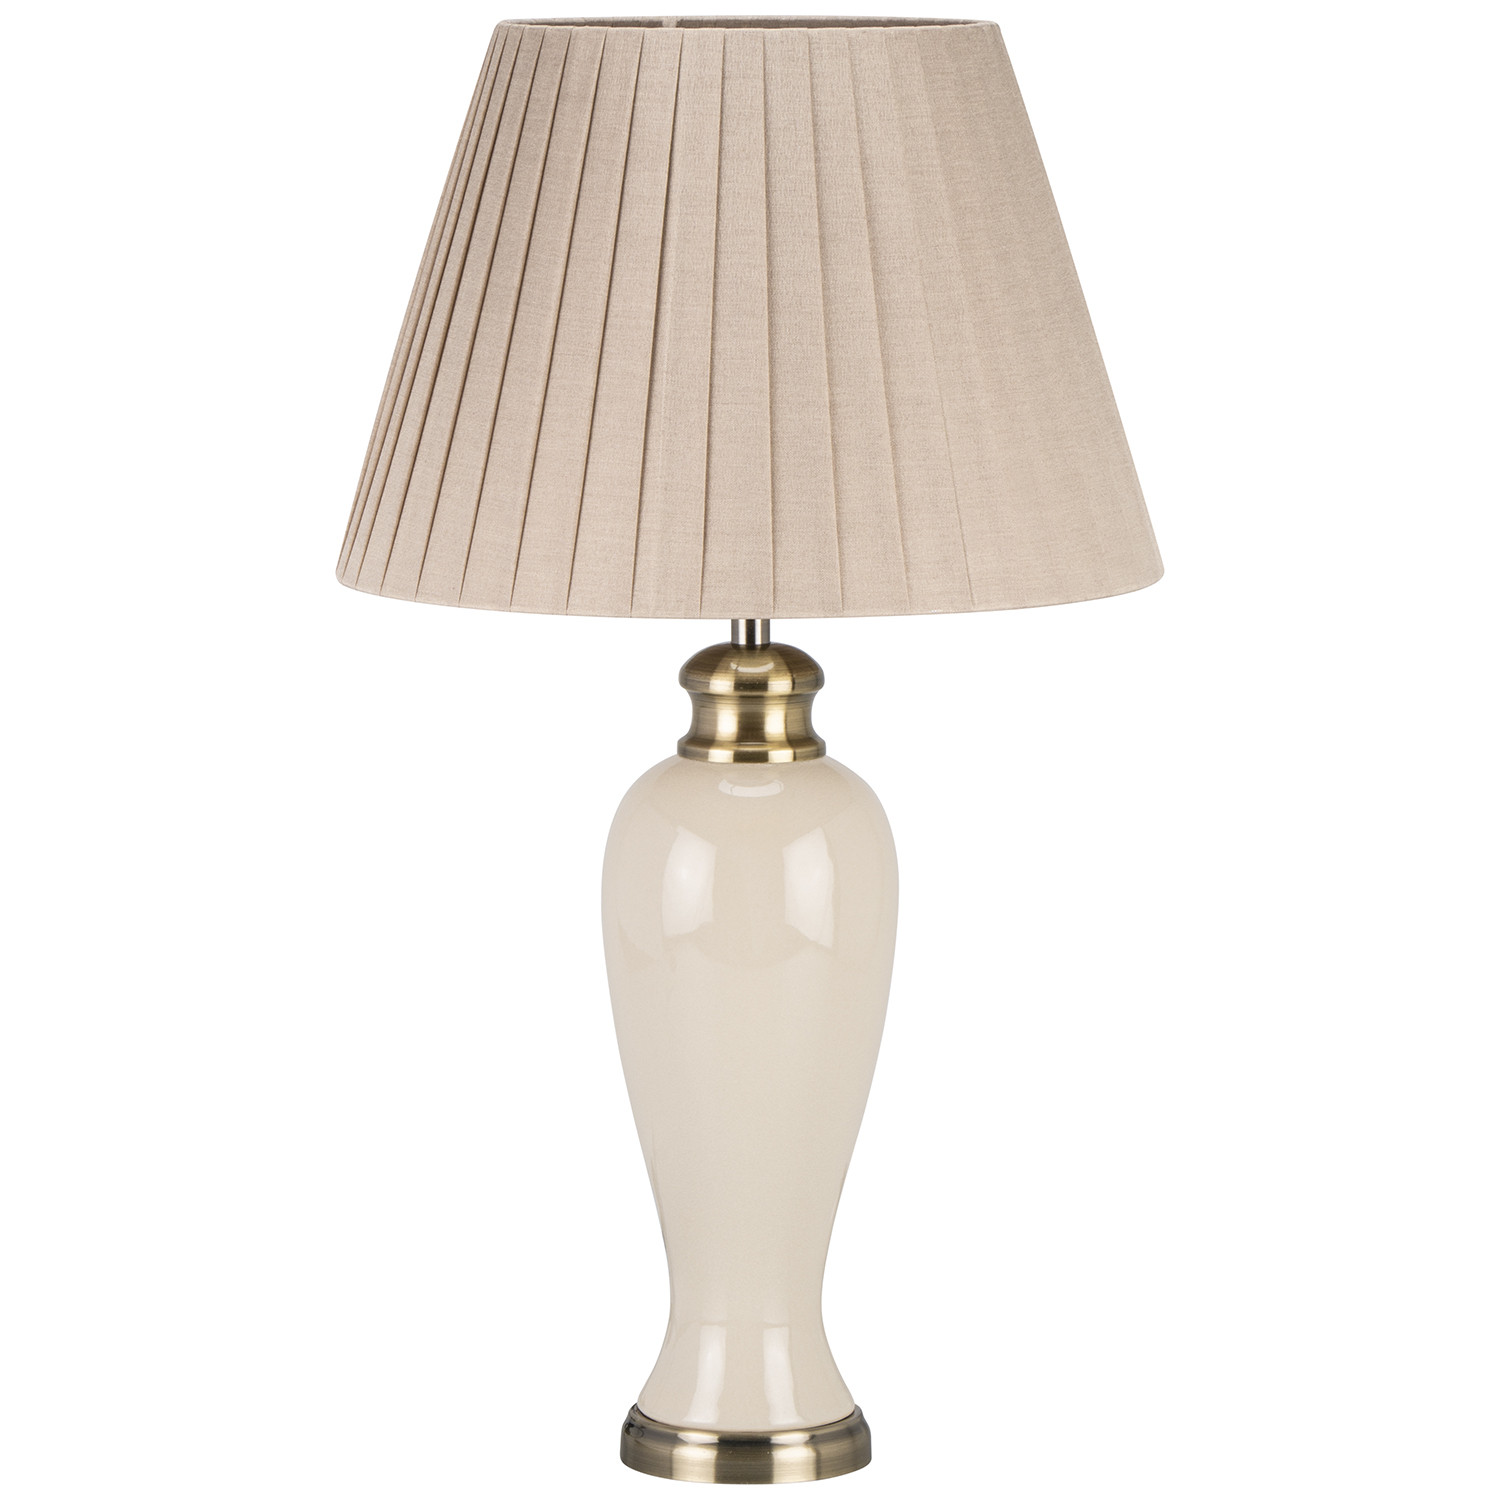 Ivory Ceramic and Brass Vintage Lamp with Pleated Shade Image 1